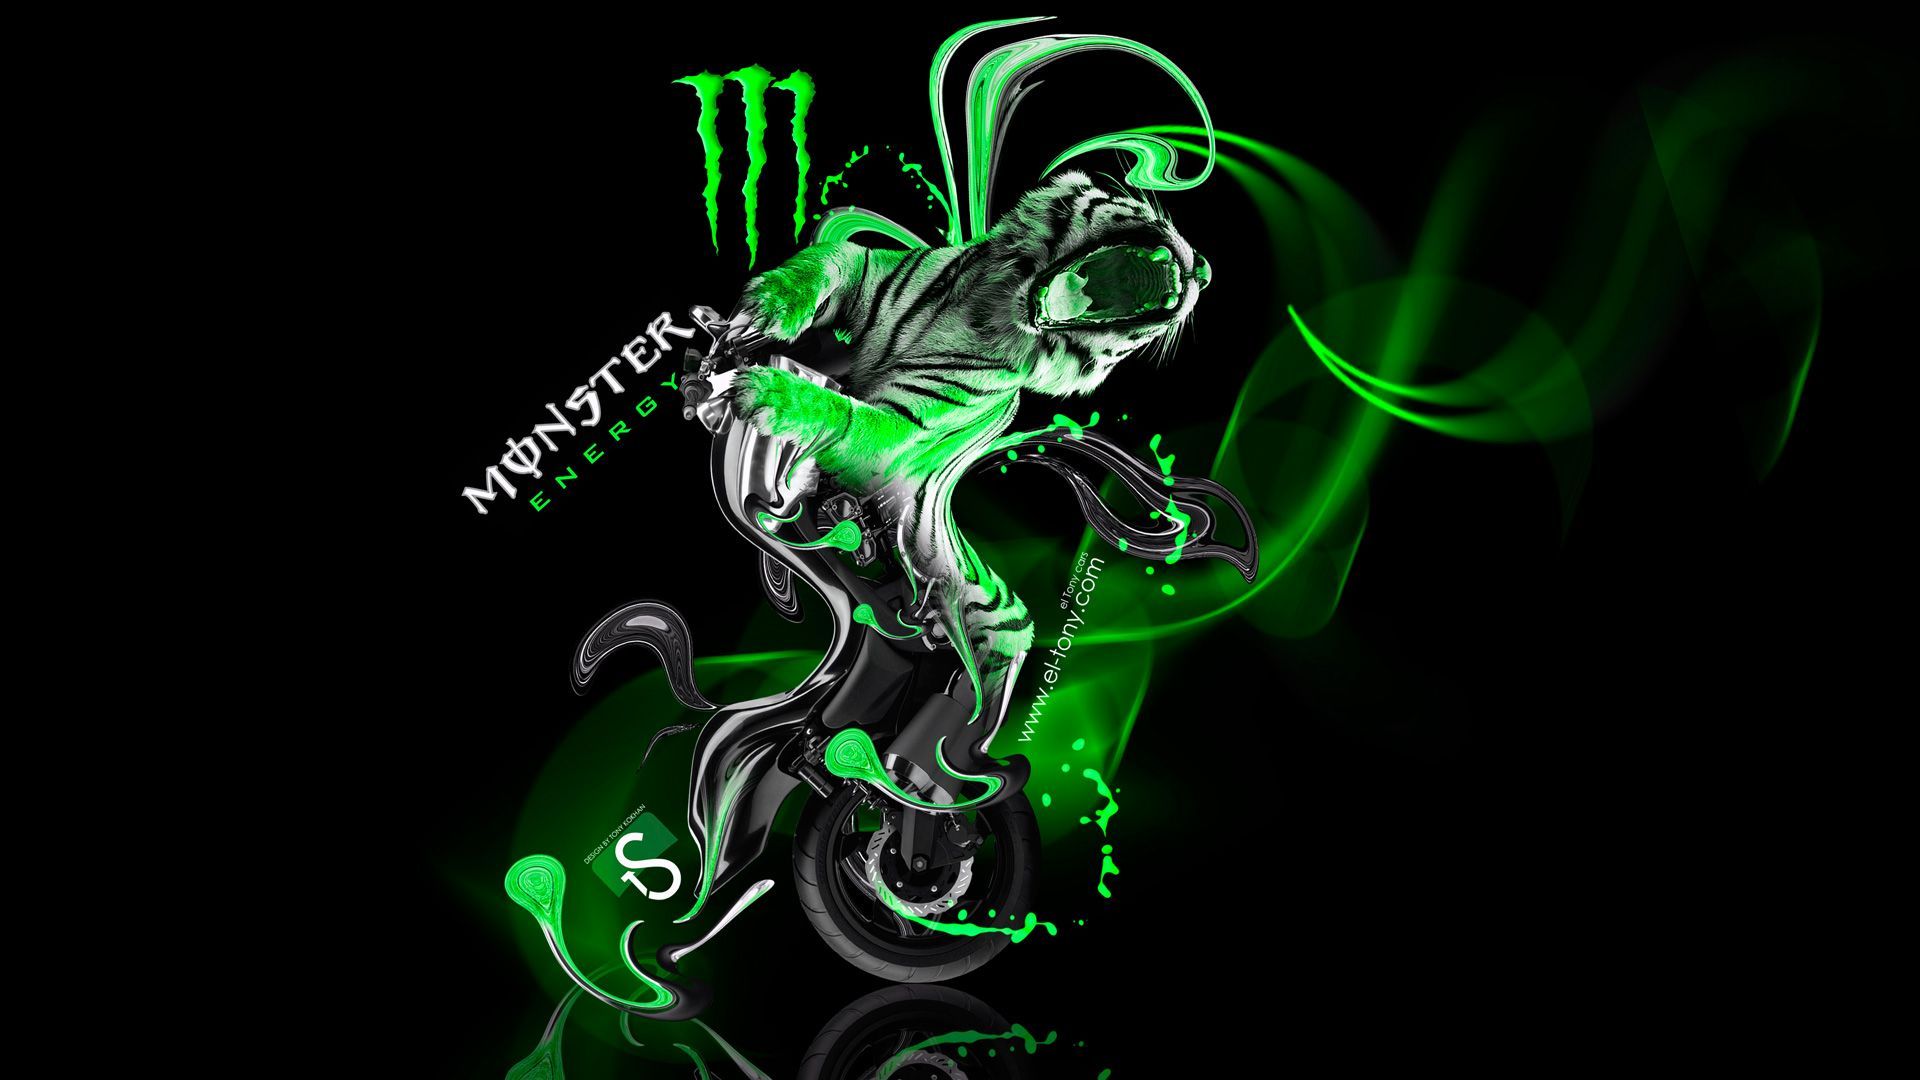 Monster Energy Wallpapers 2015 HD - Wallpaper Cave